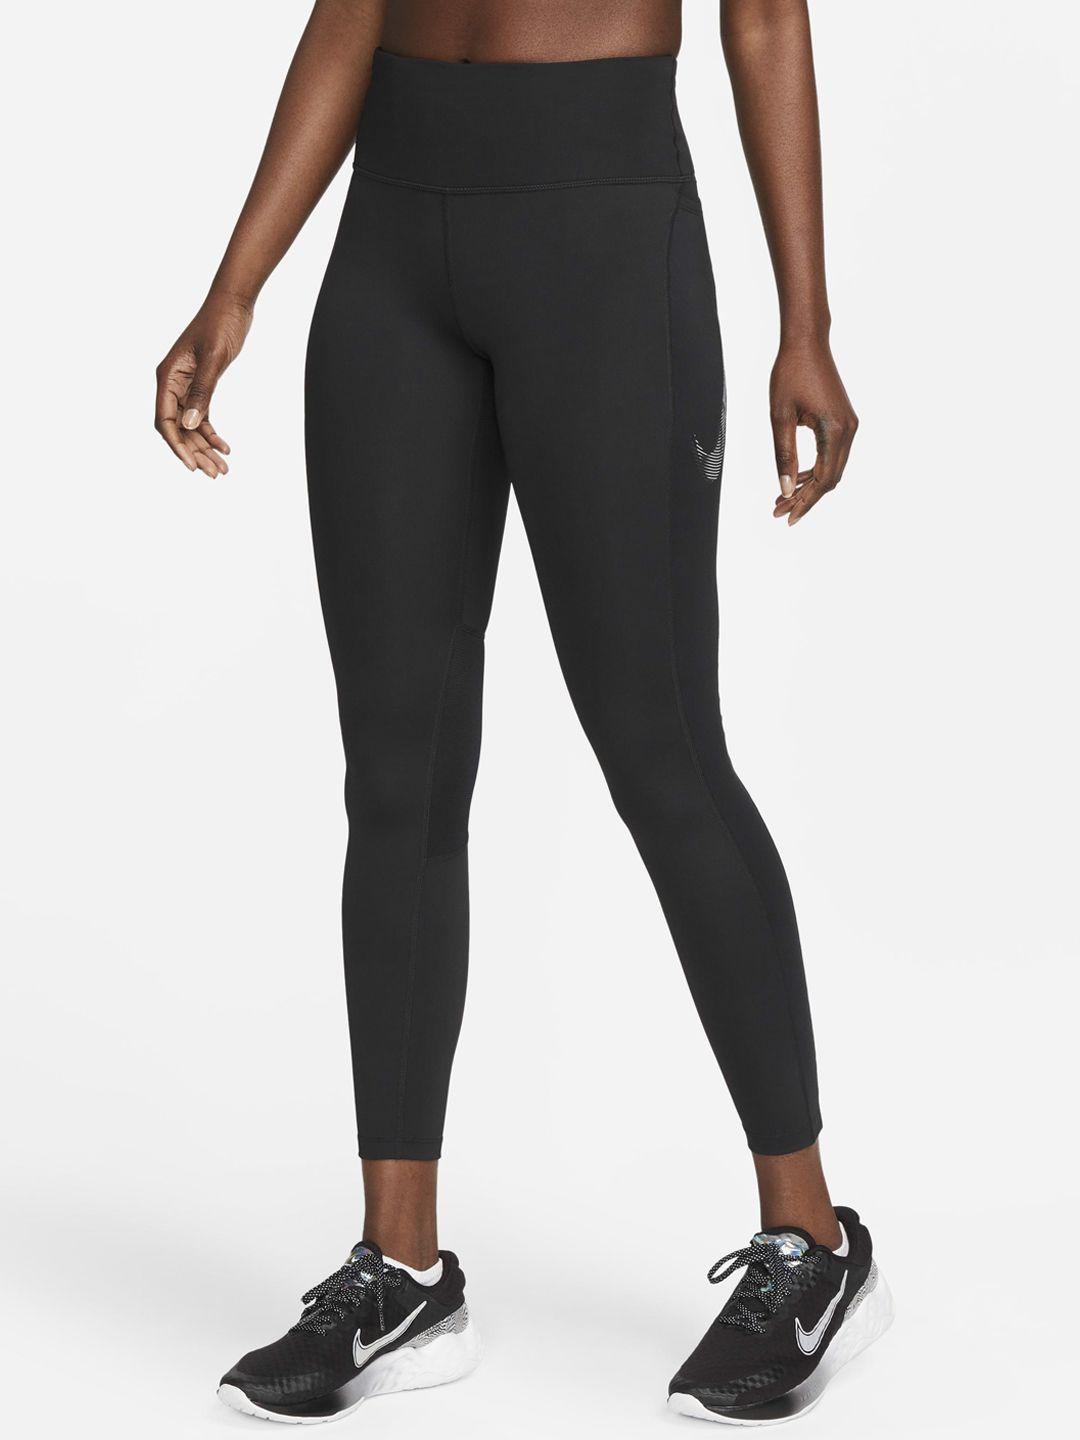 nike-dry-fit-fast-women-mid-rise-7/8-graphic-tights-with-pockets